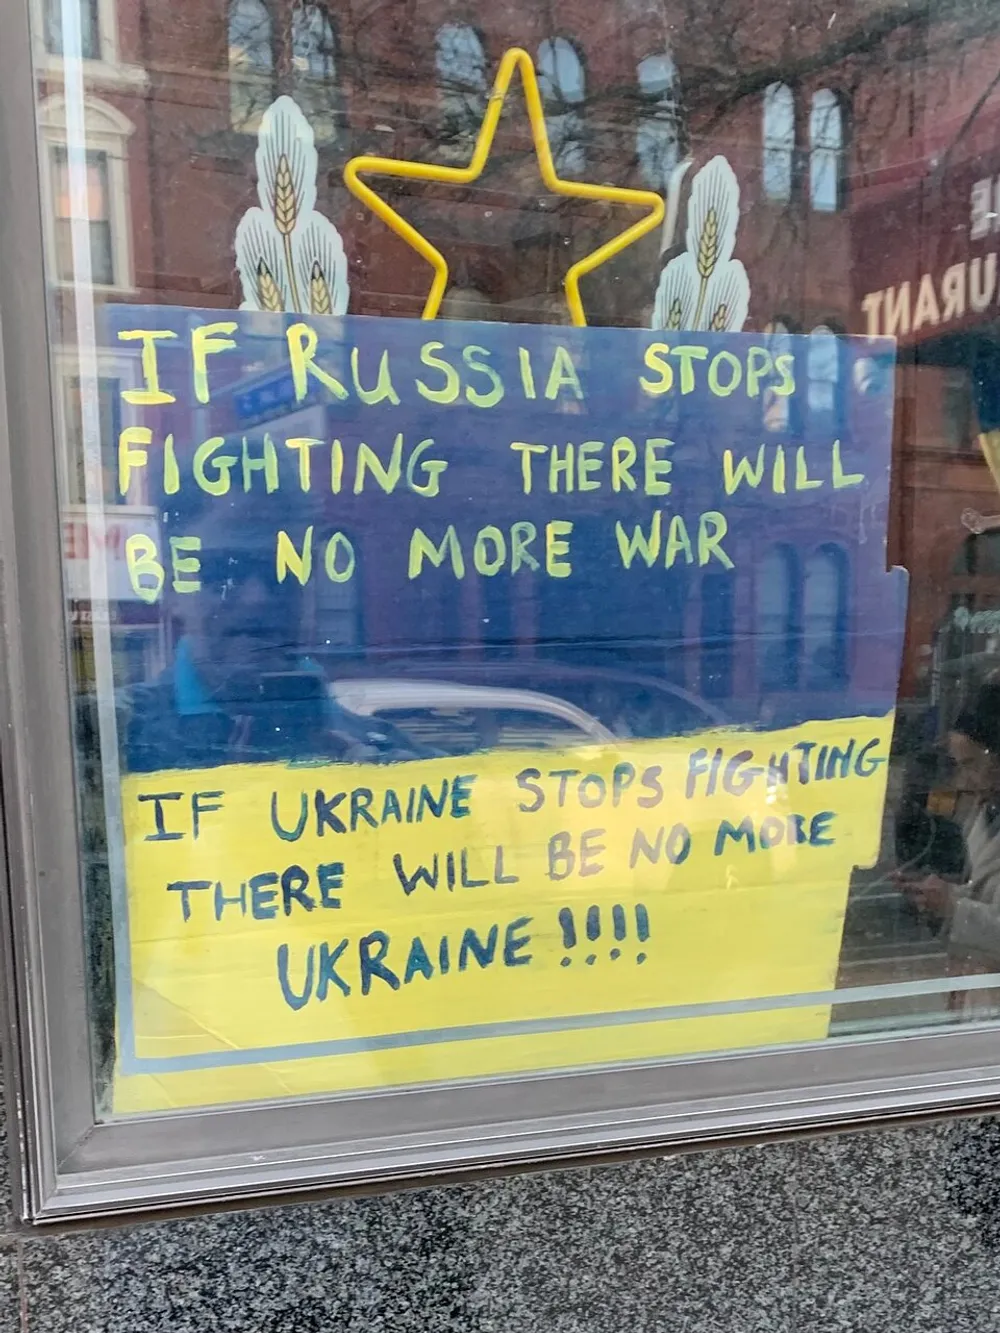 The image depicts a handwritten sign with a statement about the cessation of fighting by Russia leading to no more war and a contrasting statement about Ukraine likely expressing a political viewpoint on an ongoing conflict